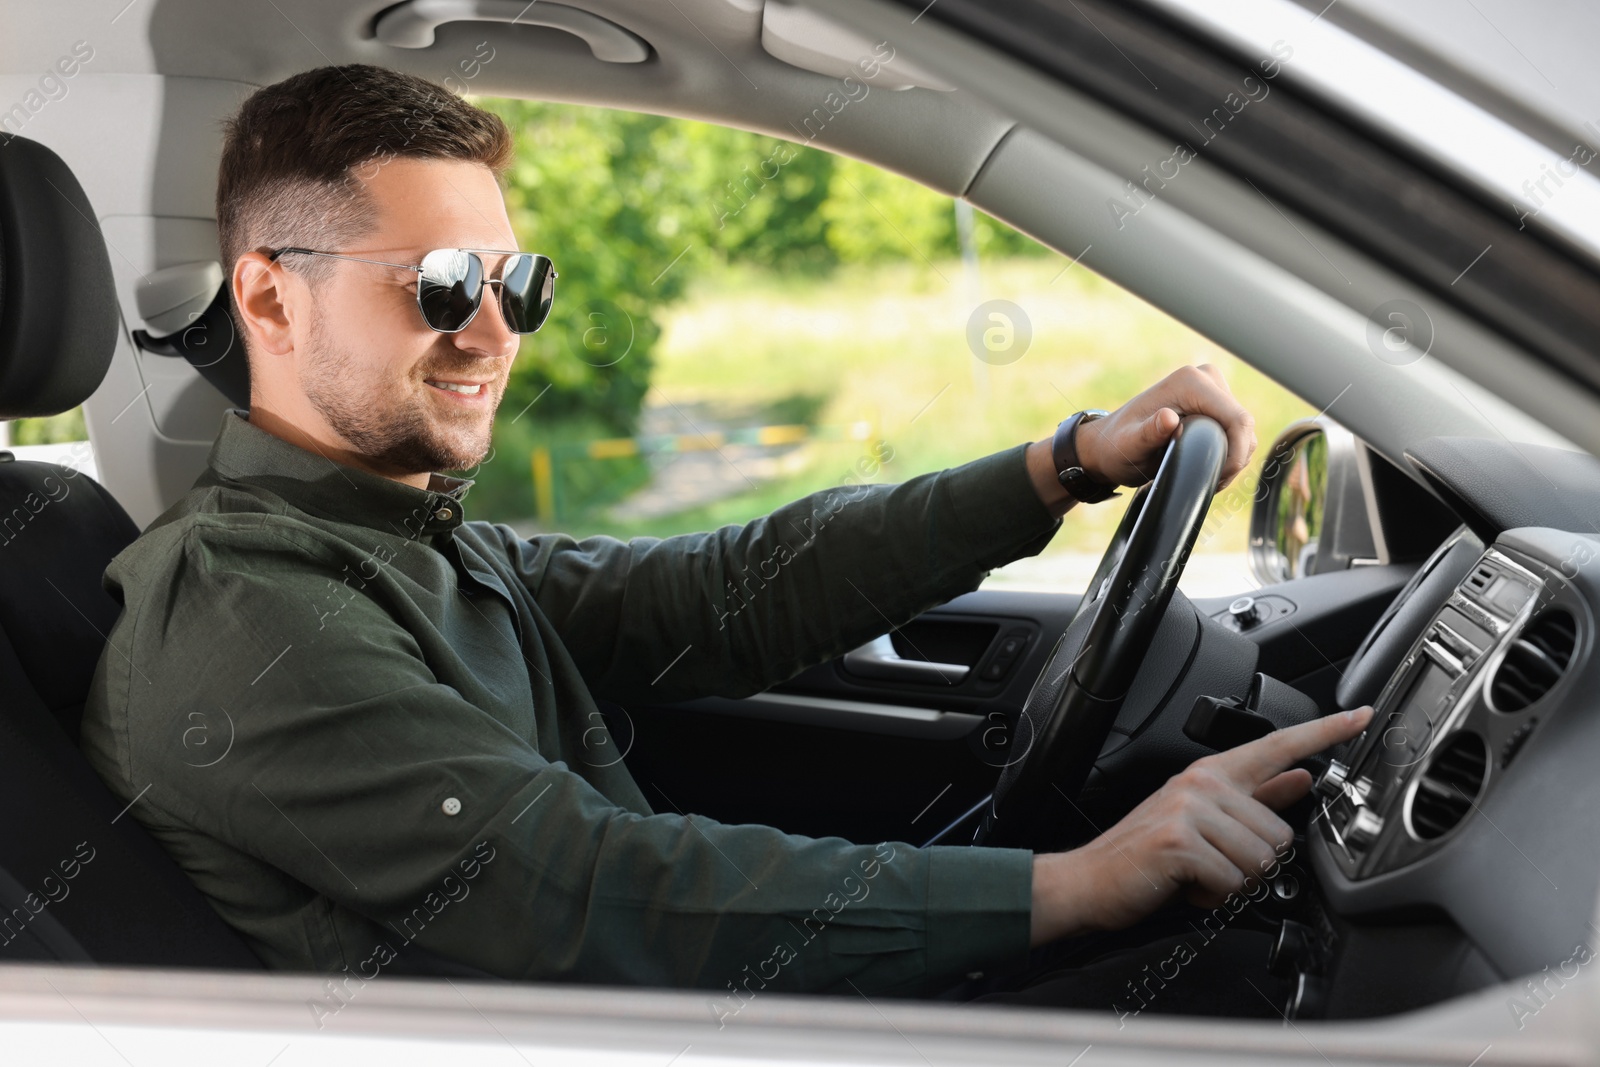 Photo of Choosing favorite radio. Man with sunglasses pressing button on vehicle audio in car